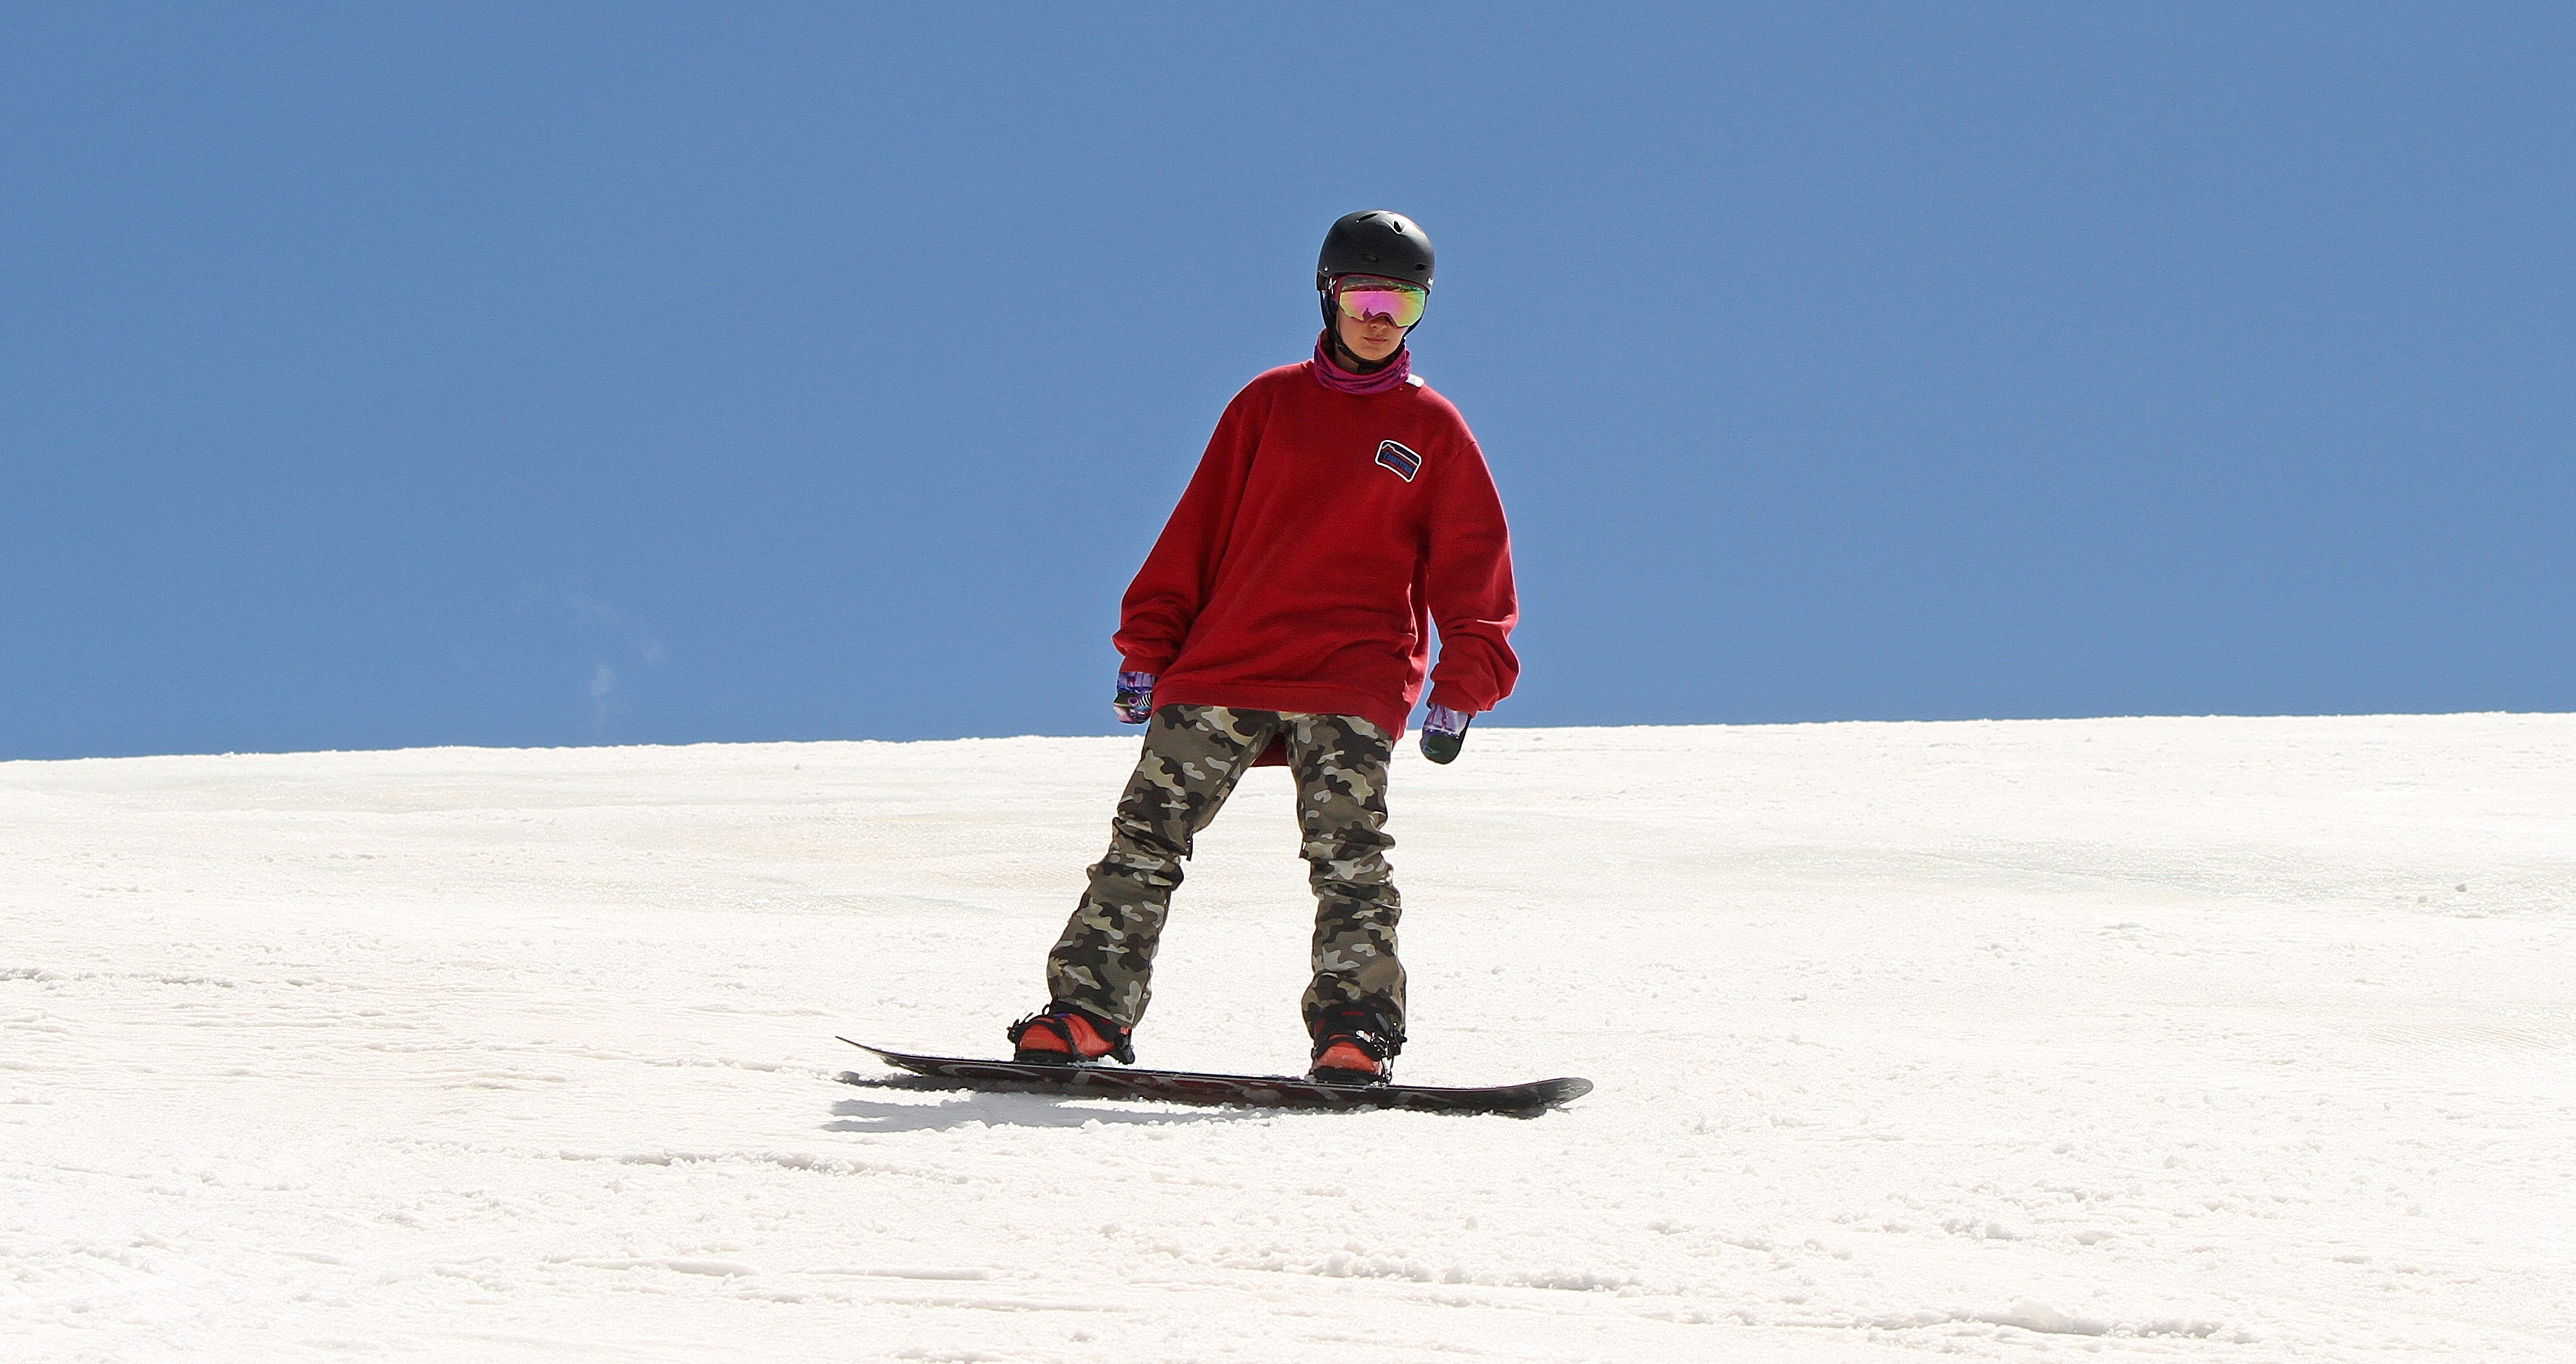 First steps towards riding switch on a snowboard | by James Streater |  Medium